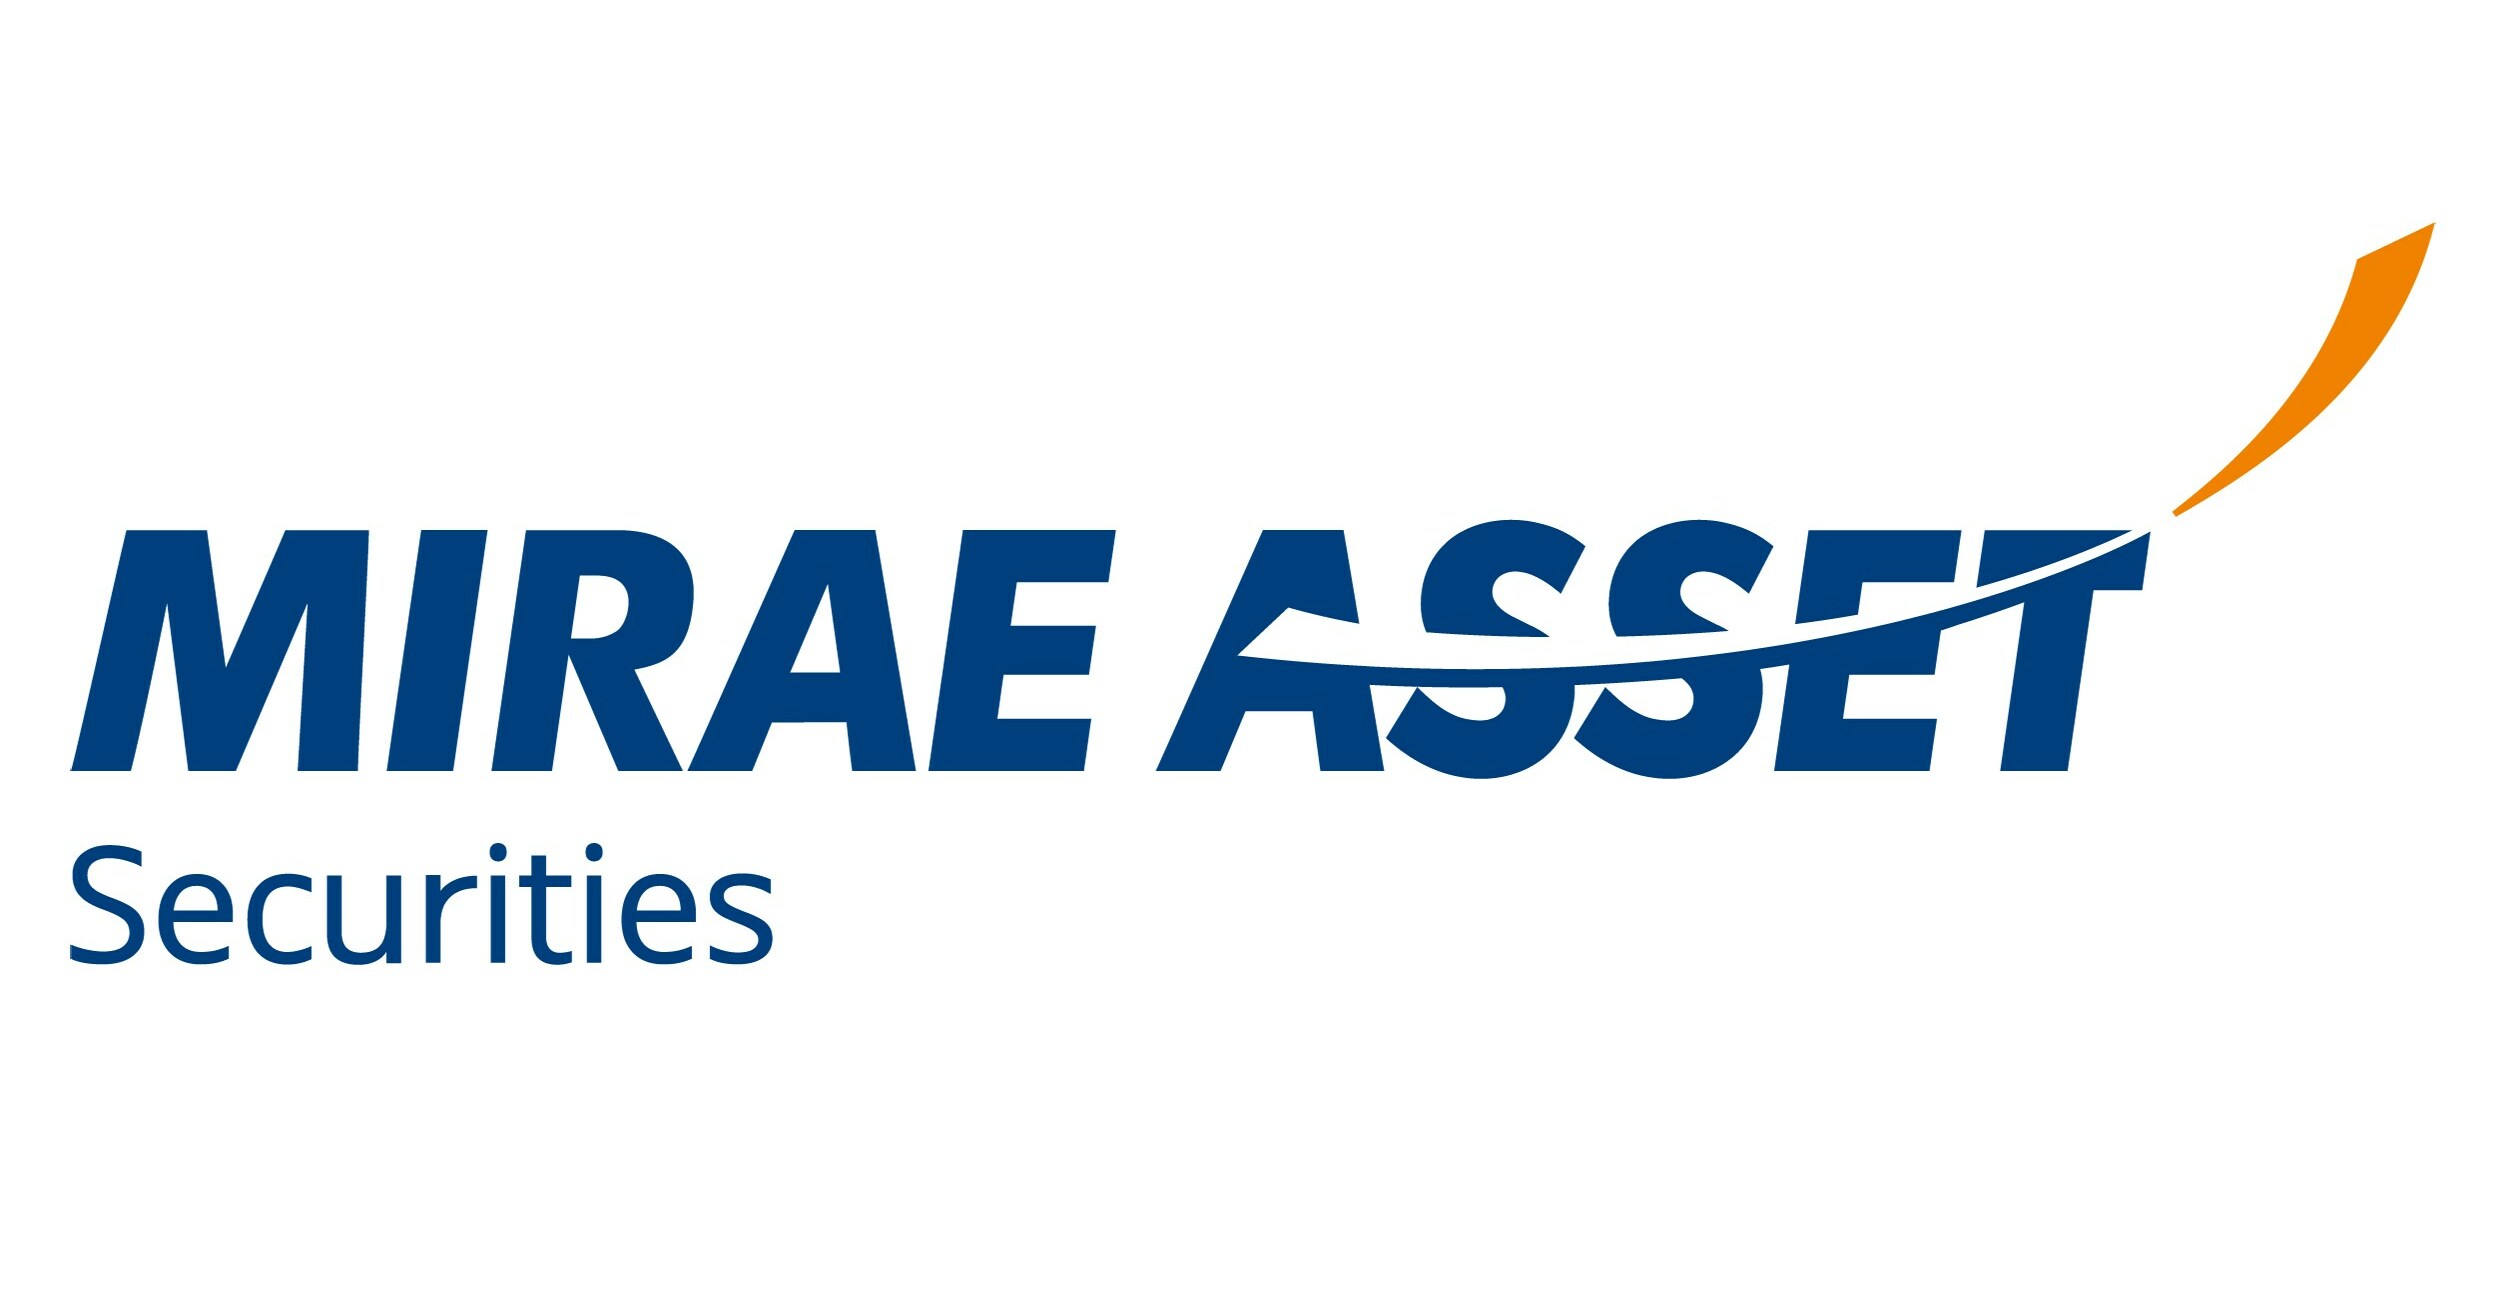 Mirae Asset Securities Appoints Jung Ho Rhee as Vice Chairman